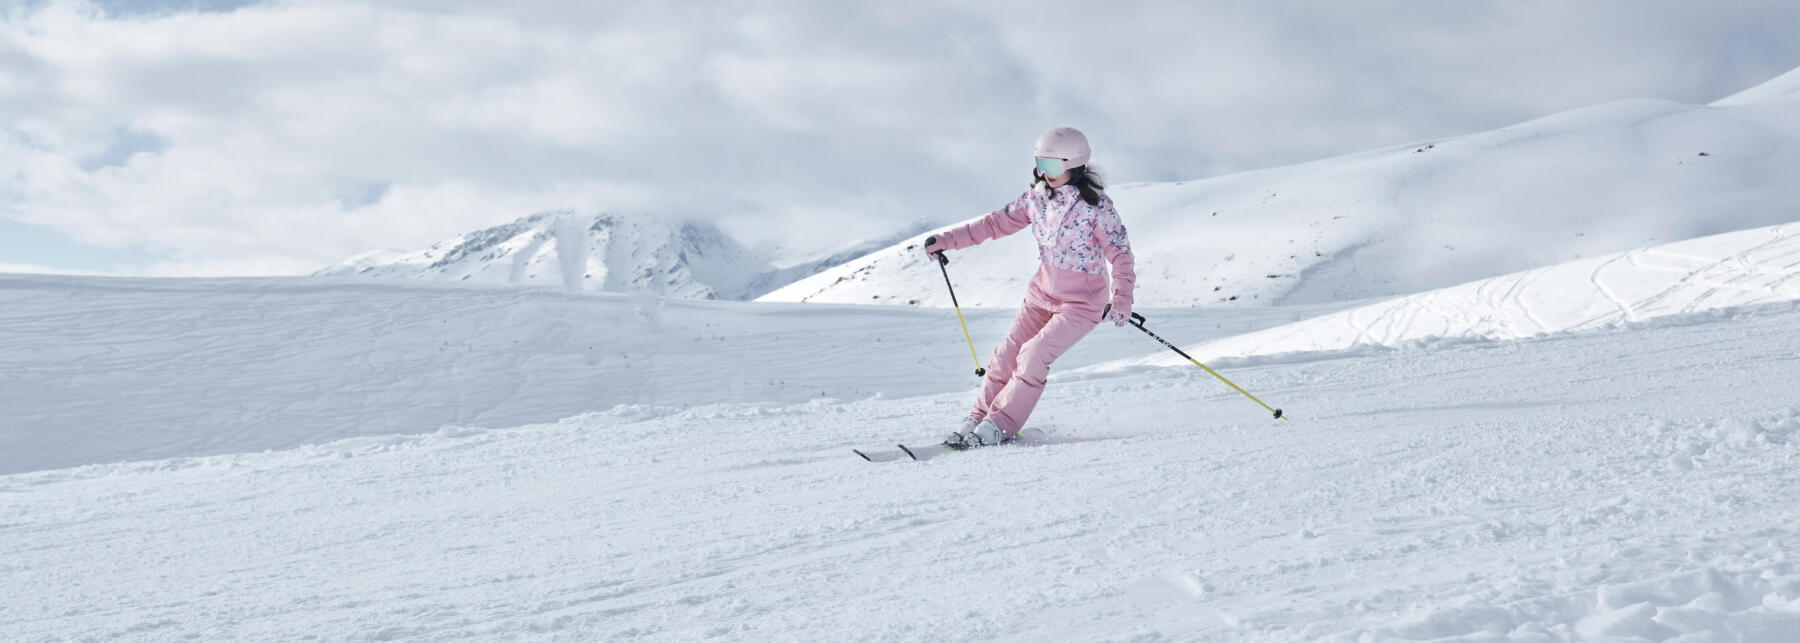 How to pick the right size skis and poles